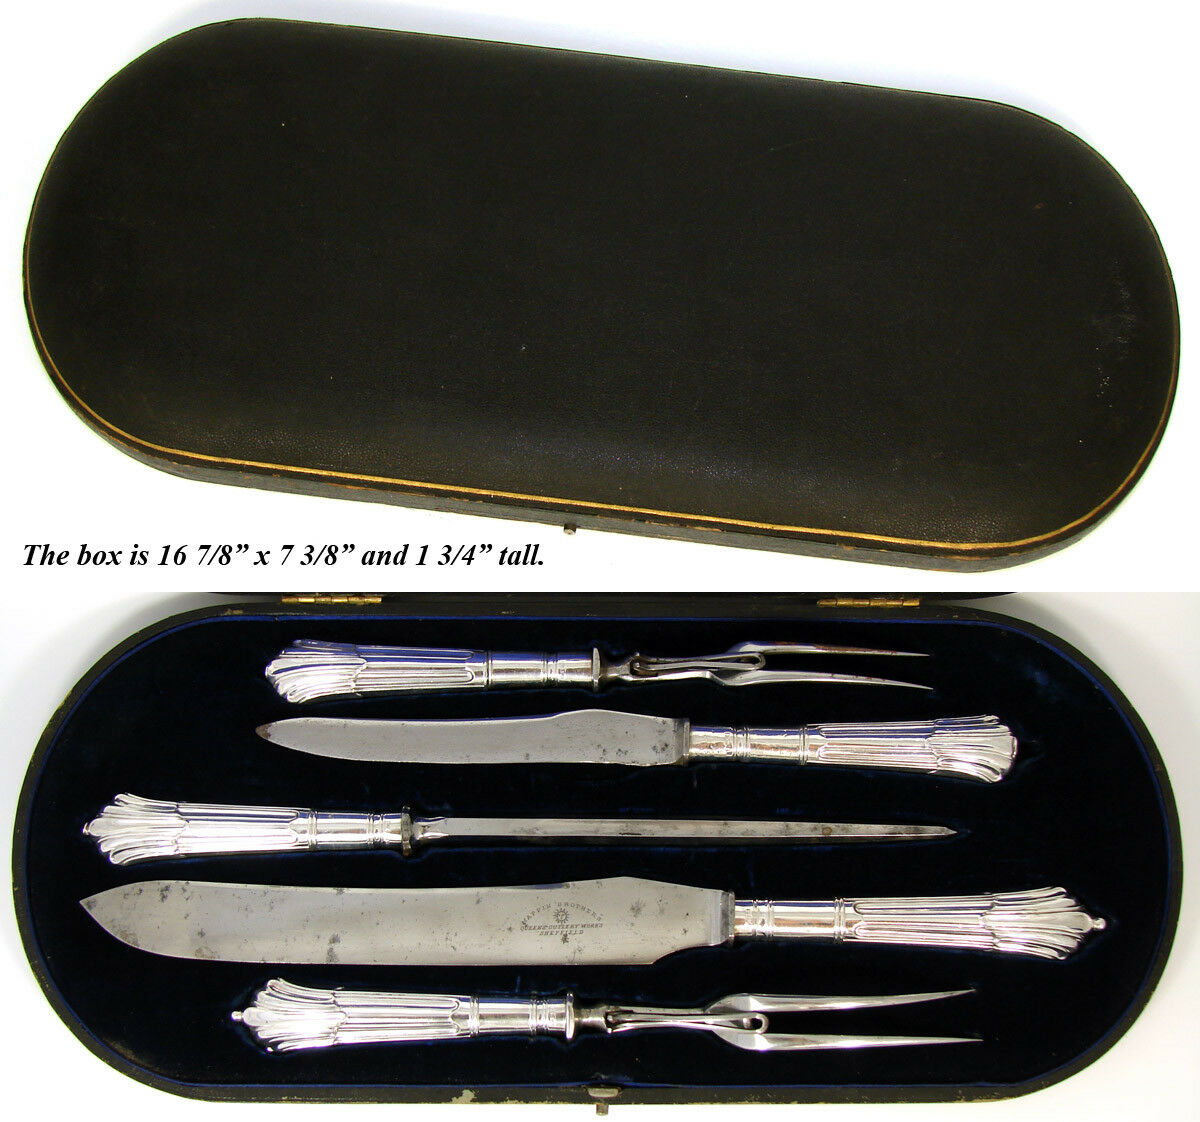 Fab Antique Mappin Brothers 5pc Sterling Silver Meat Carving Set, Original Box